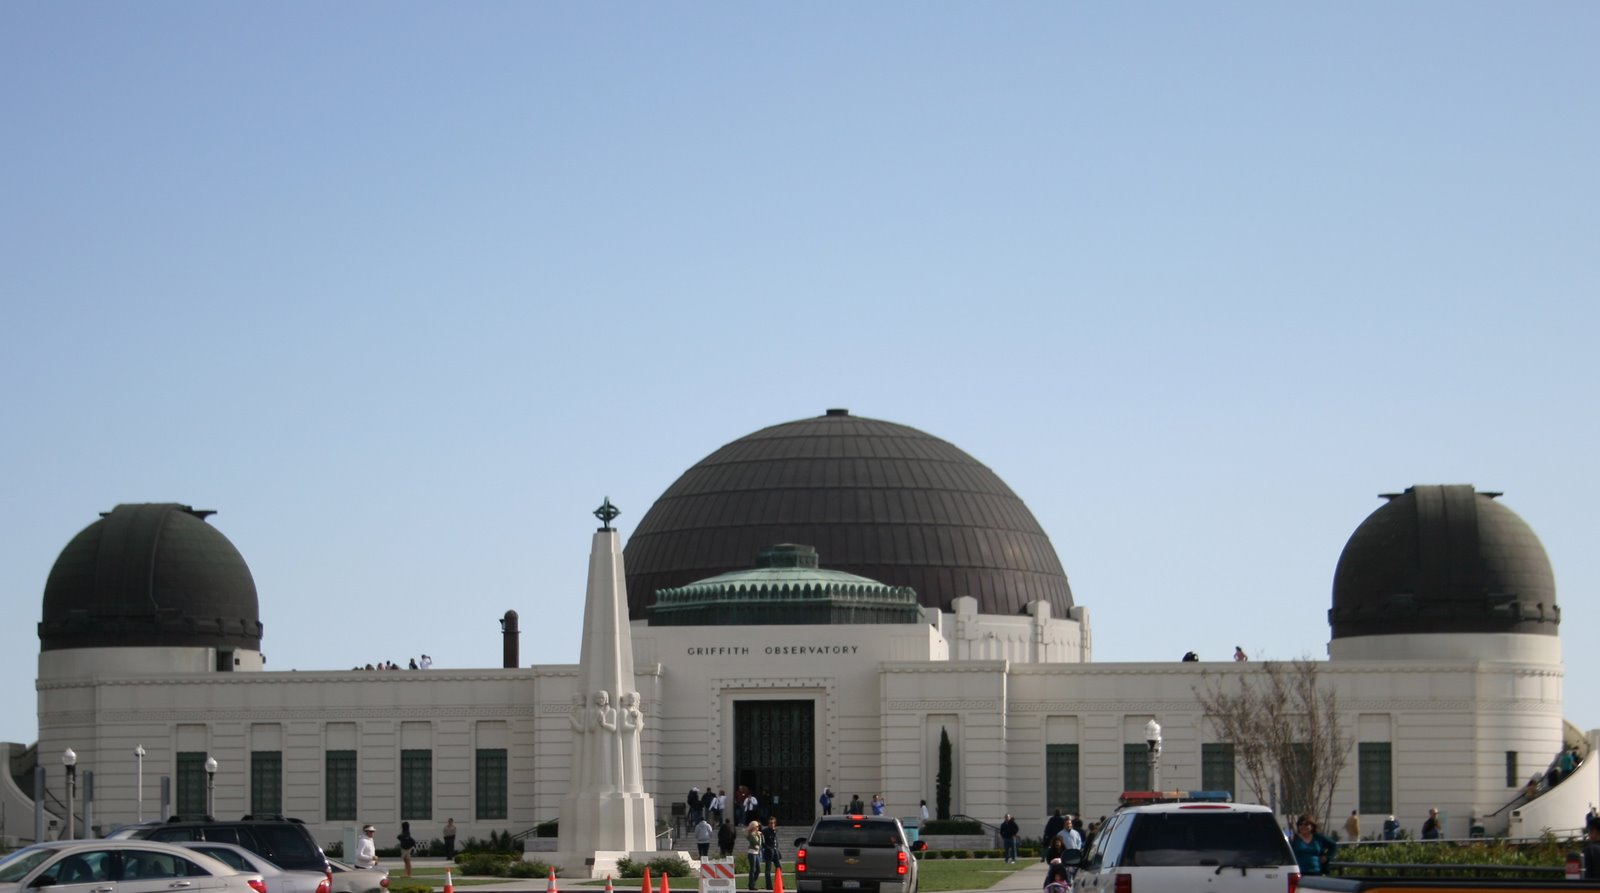 [griffith+observatory+all.jpg]